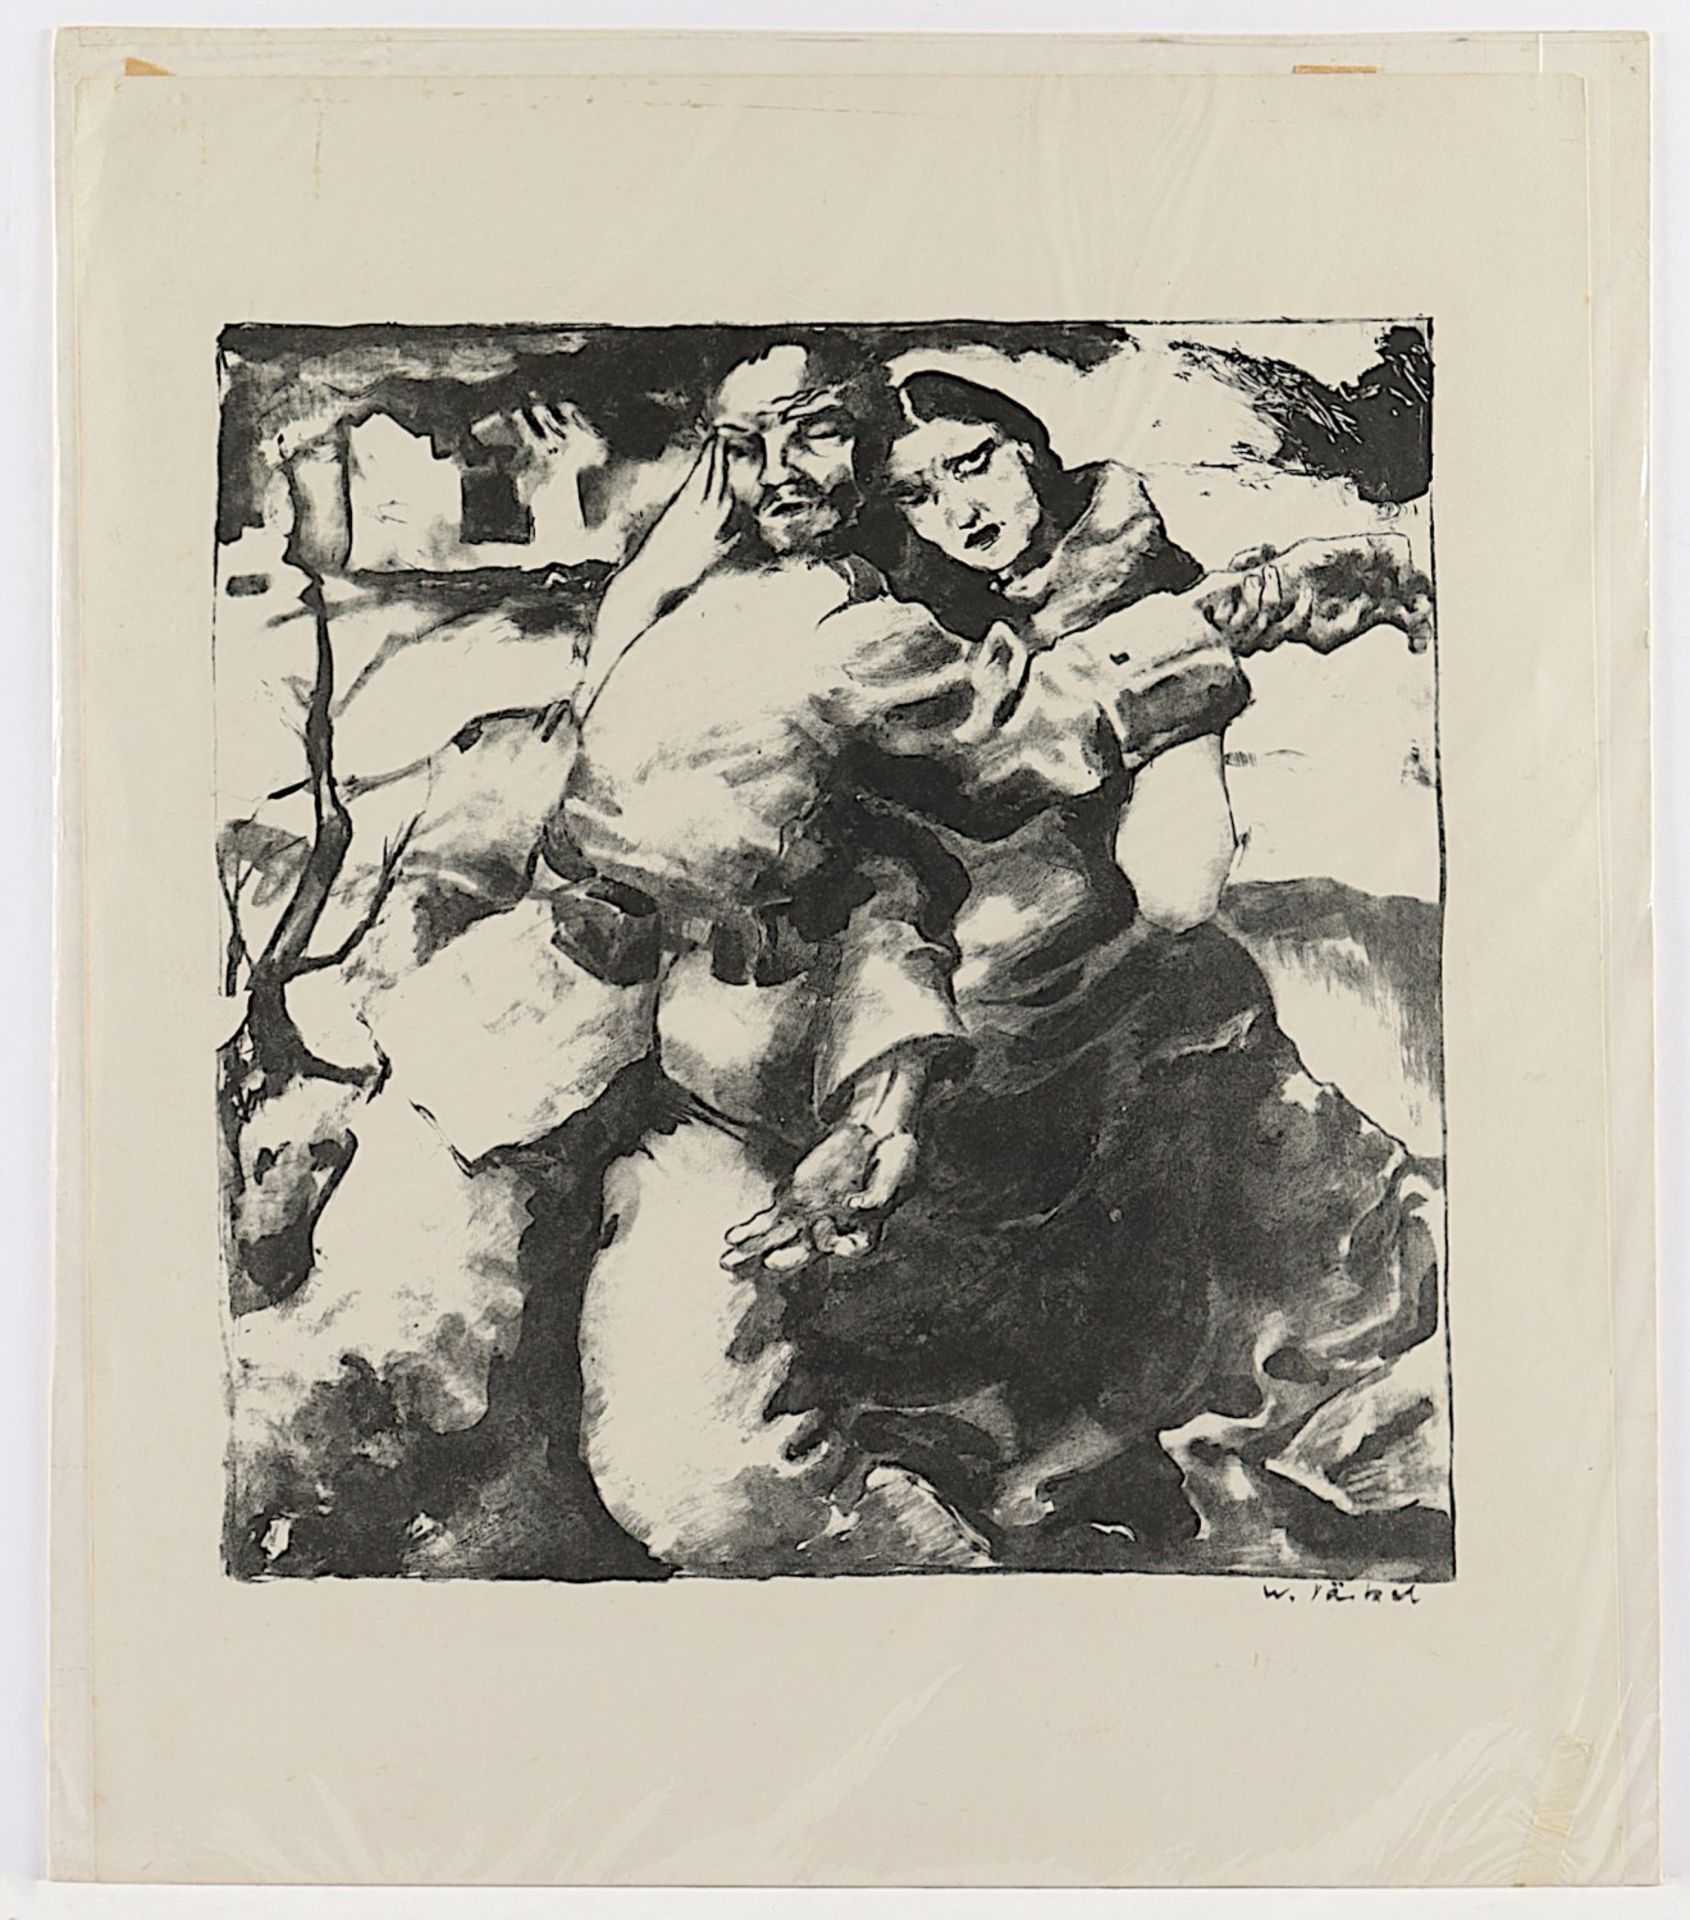 JAECKEL, Willy, "Paar", Lithografie, - Image 2 of 2